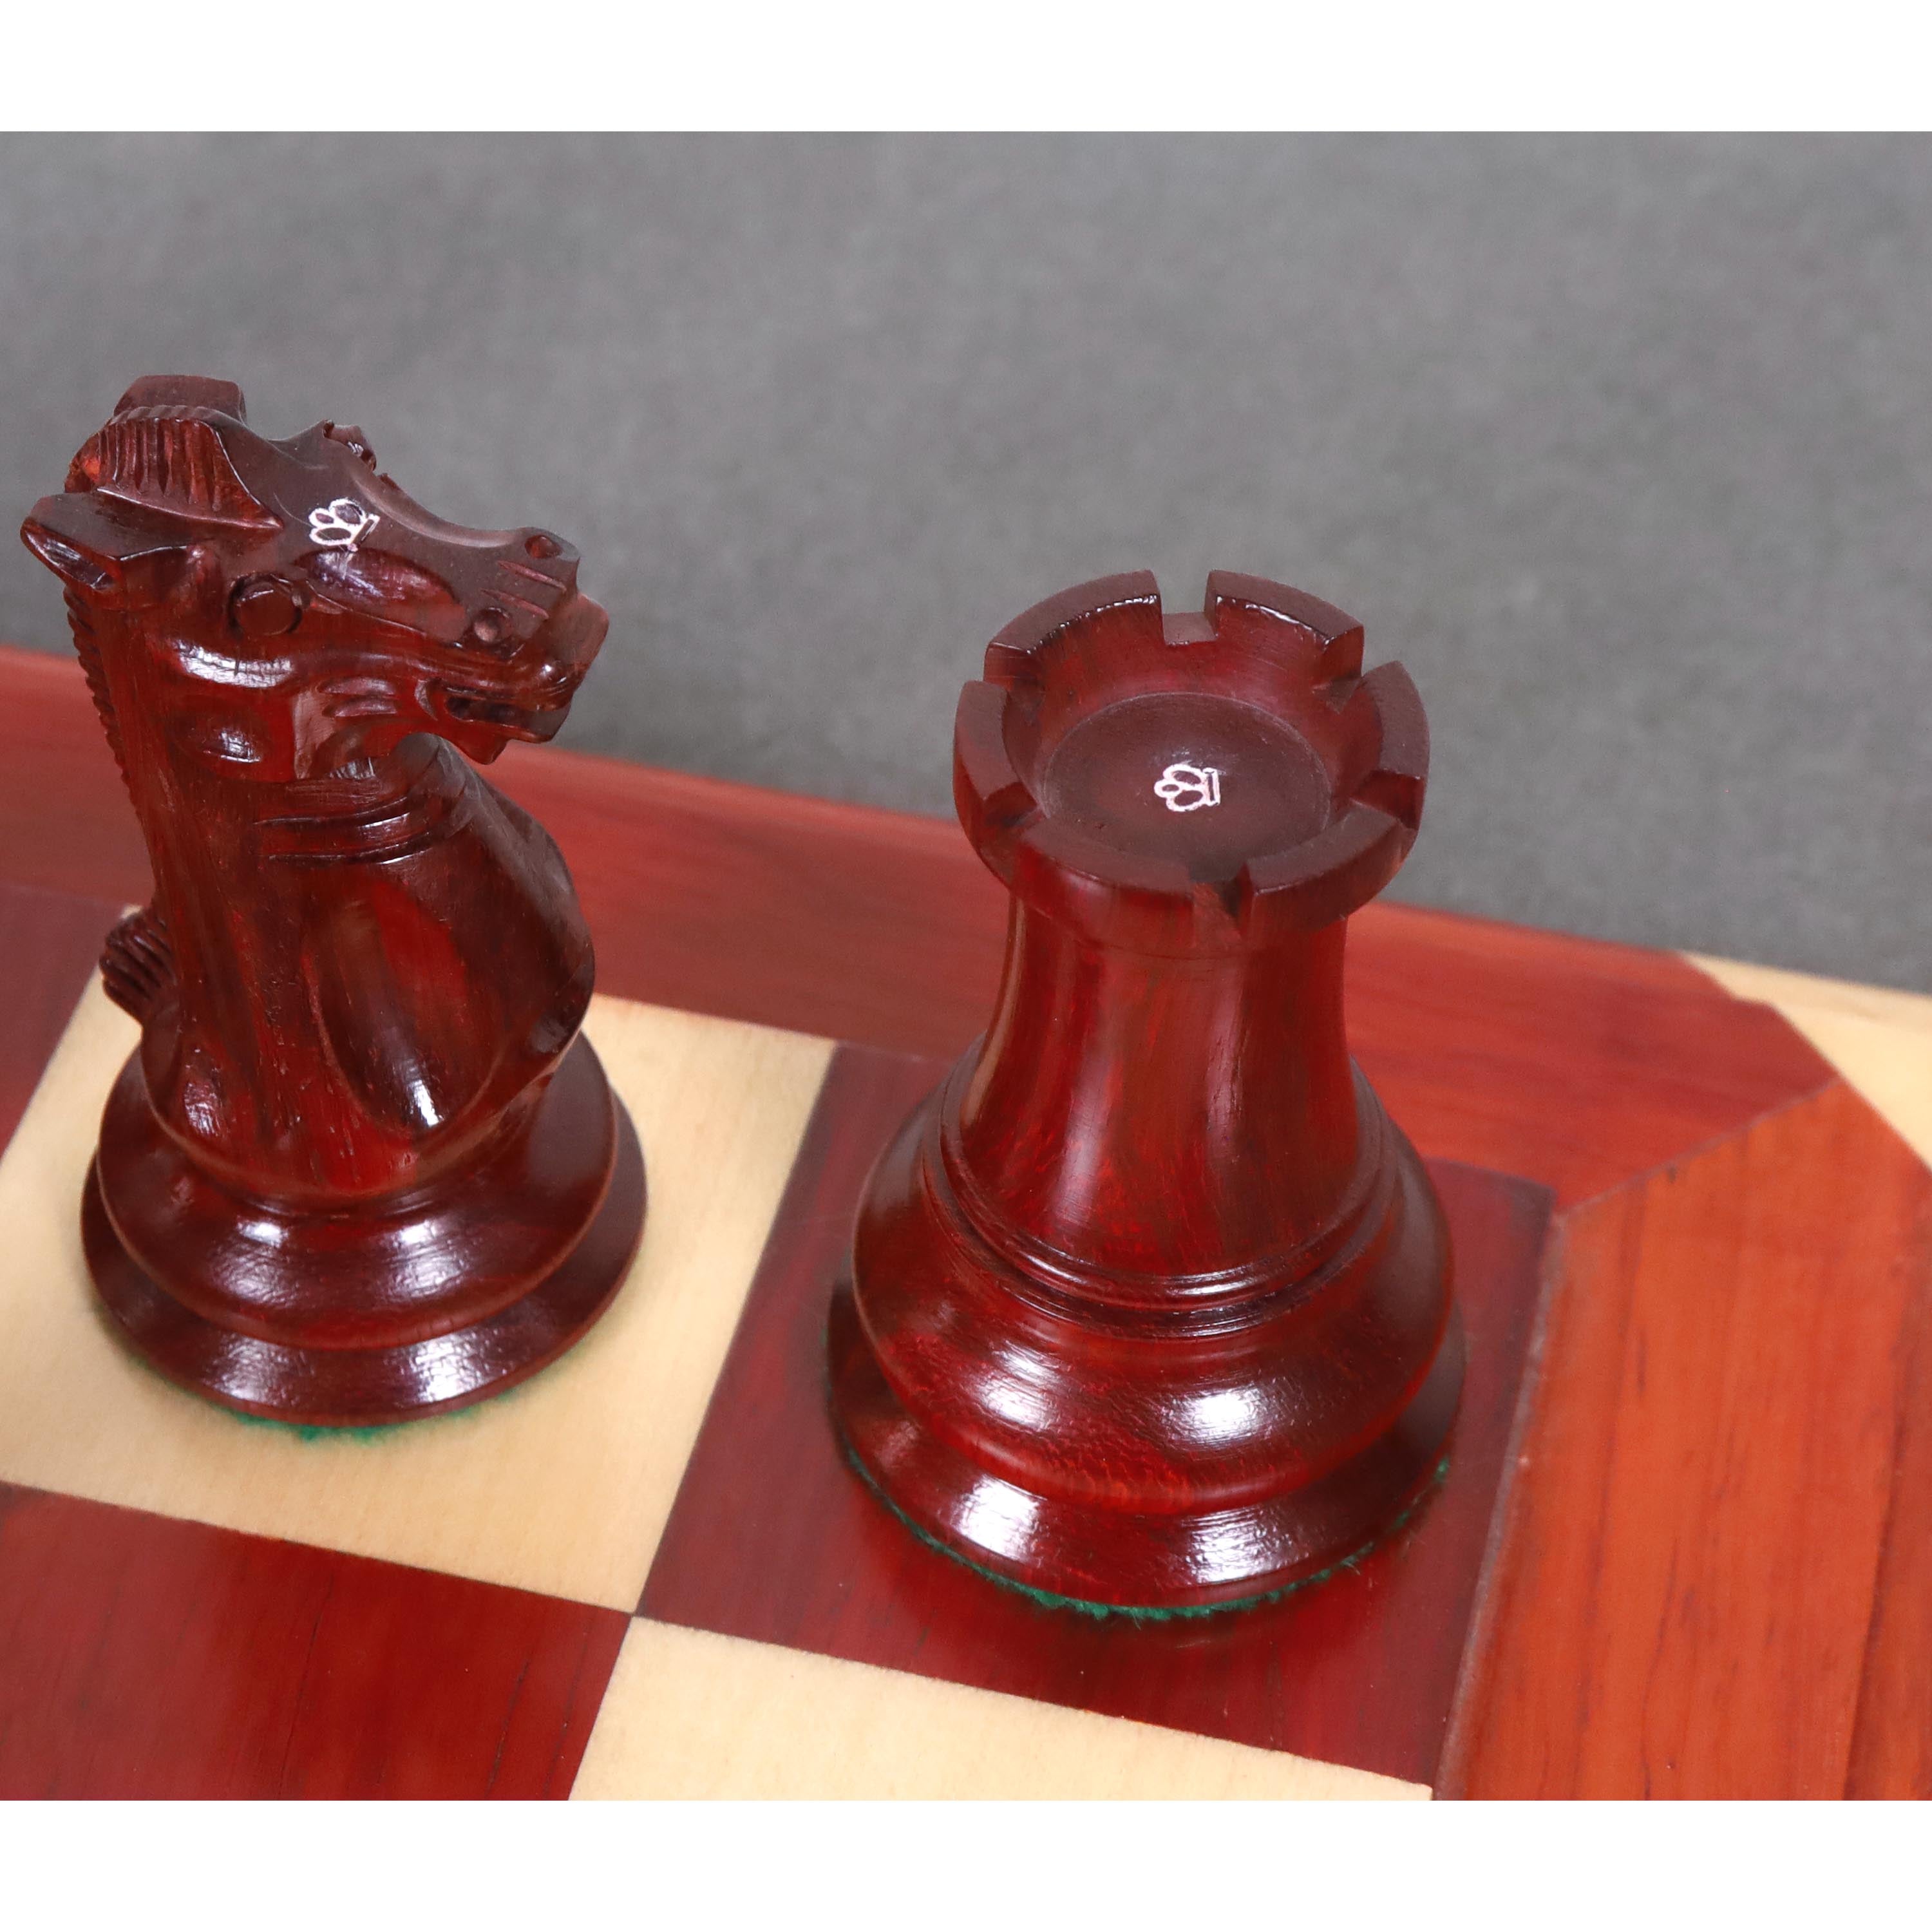 Reproduced 1849 Staunton Chess Pieces Only set